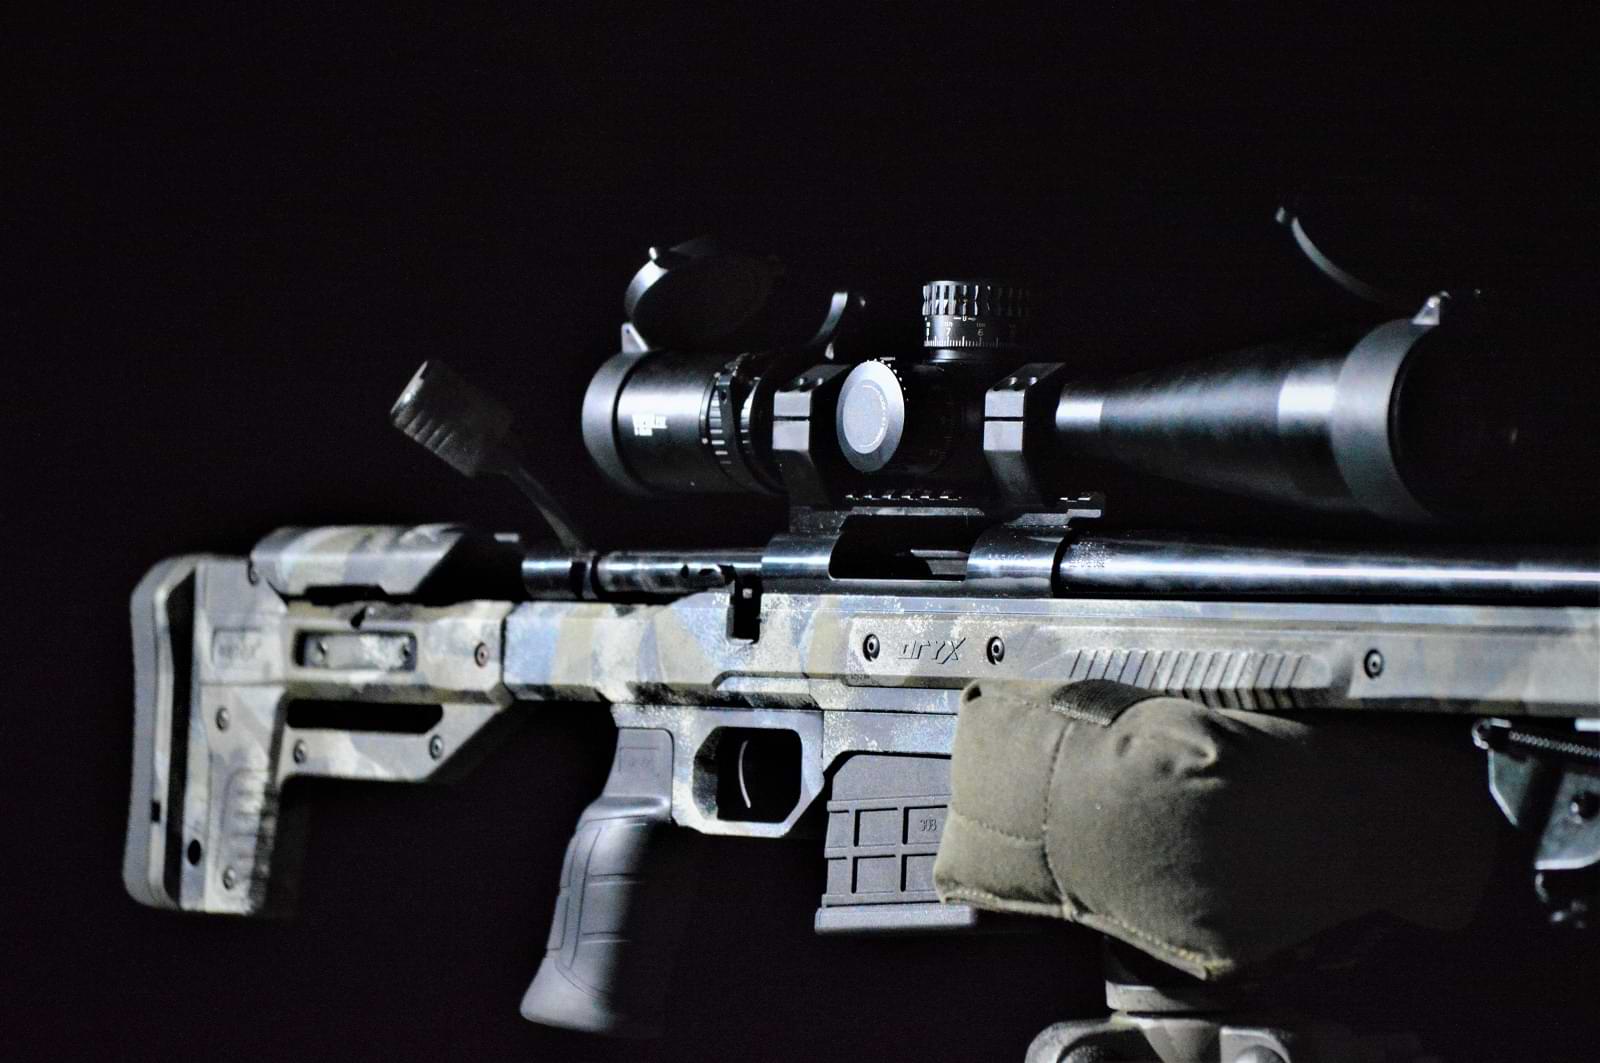 Howa 1500 in an Oryx Chassis